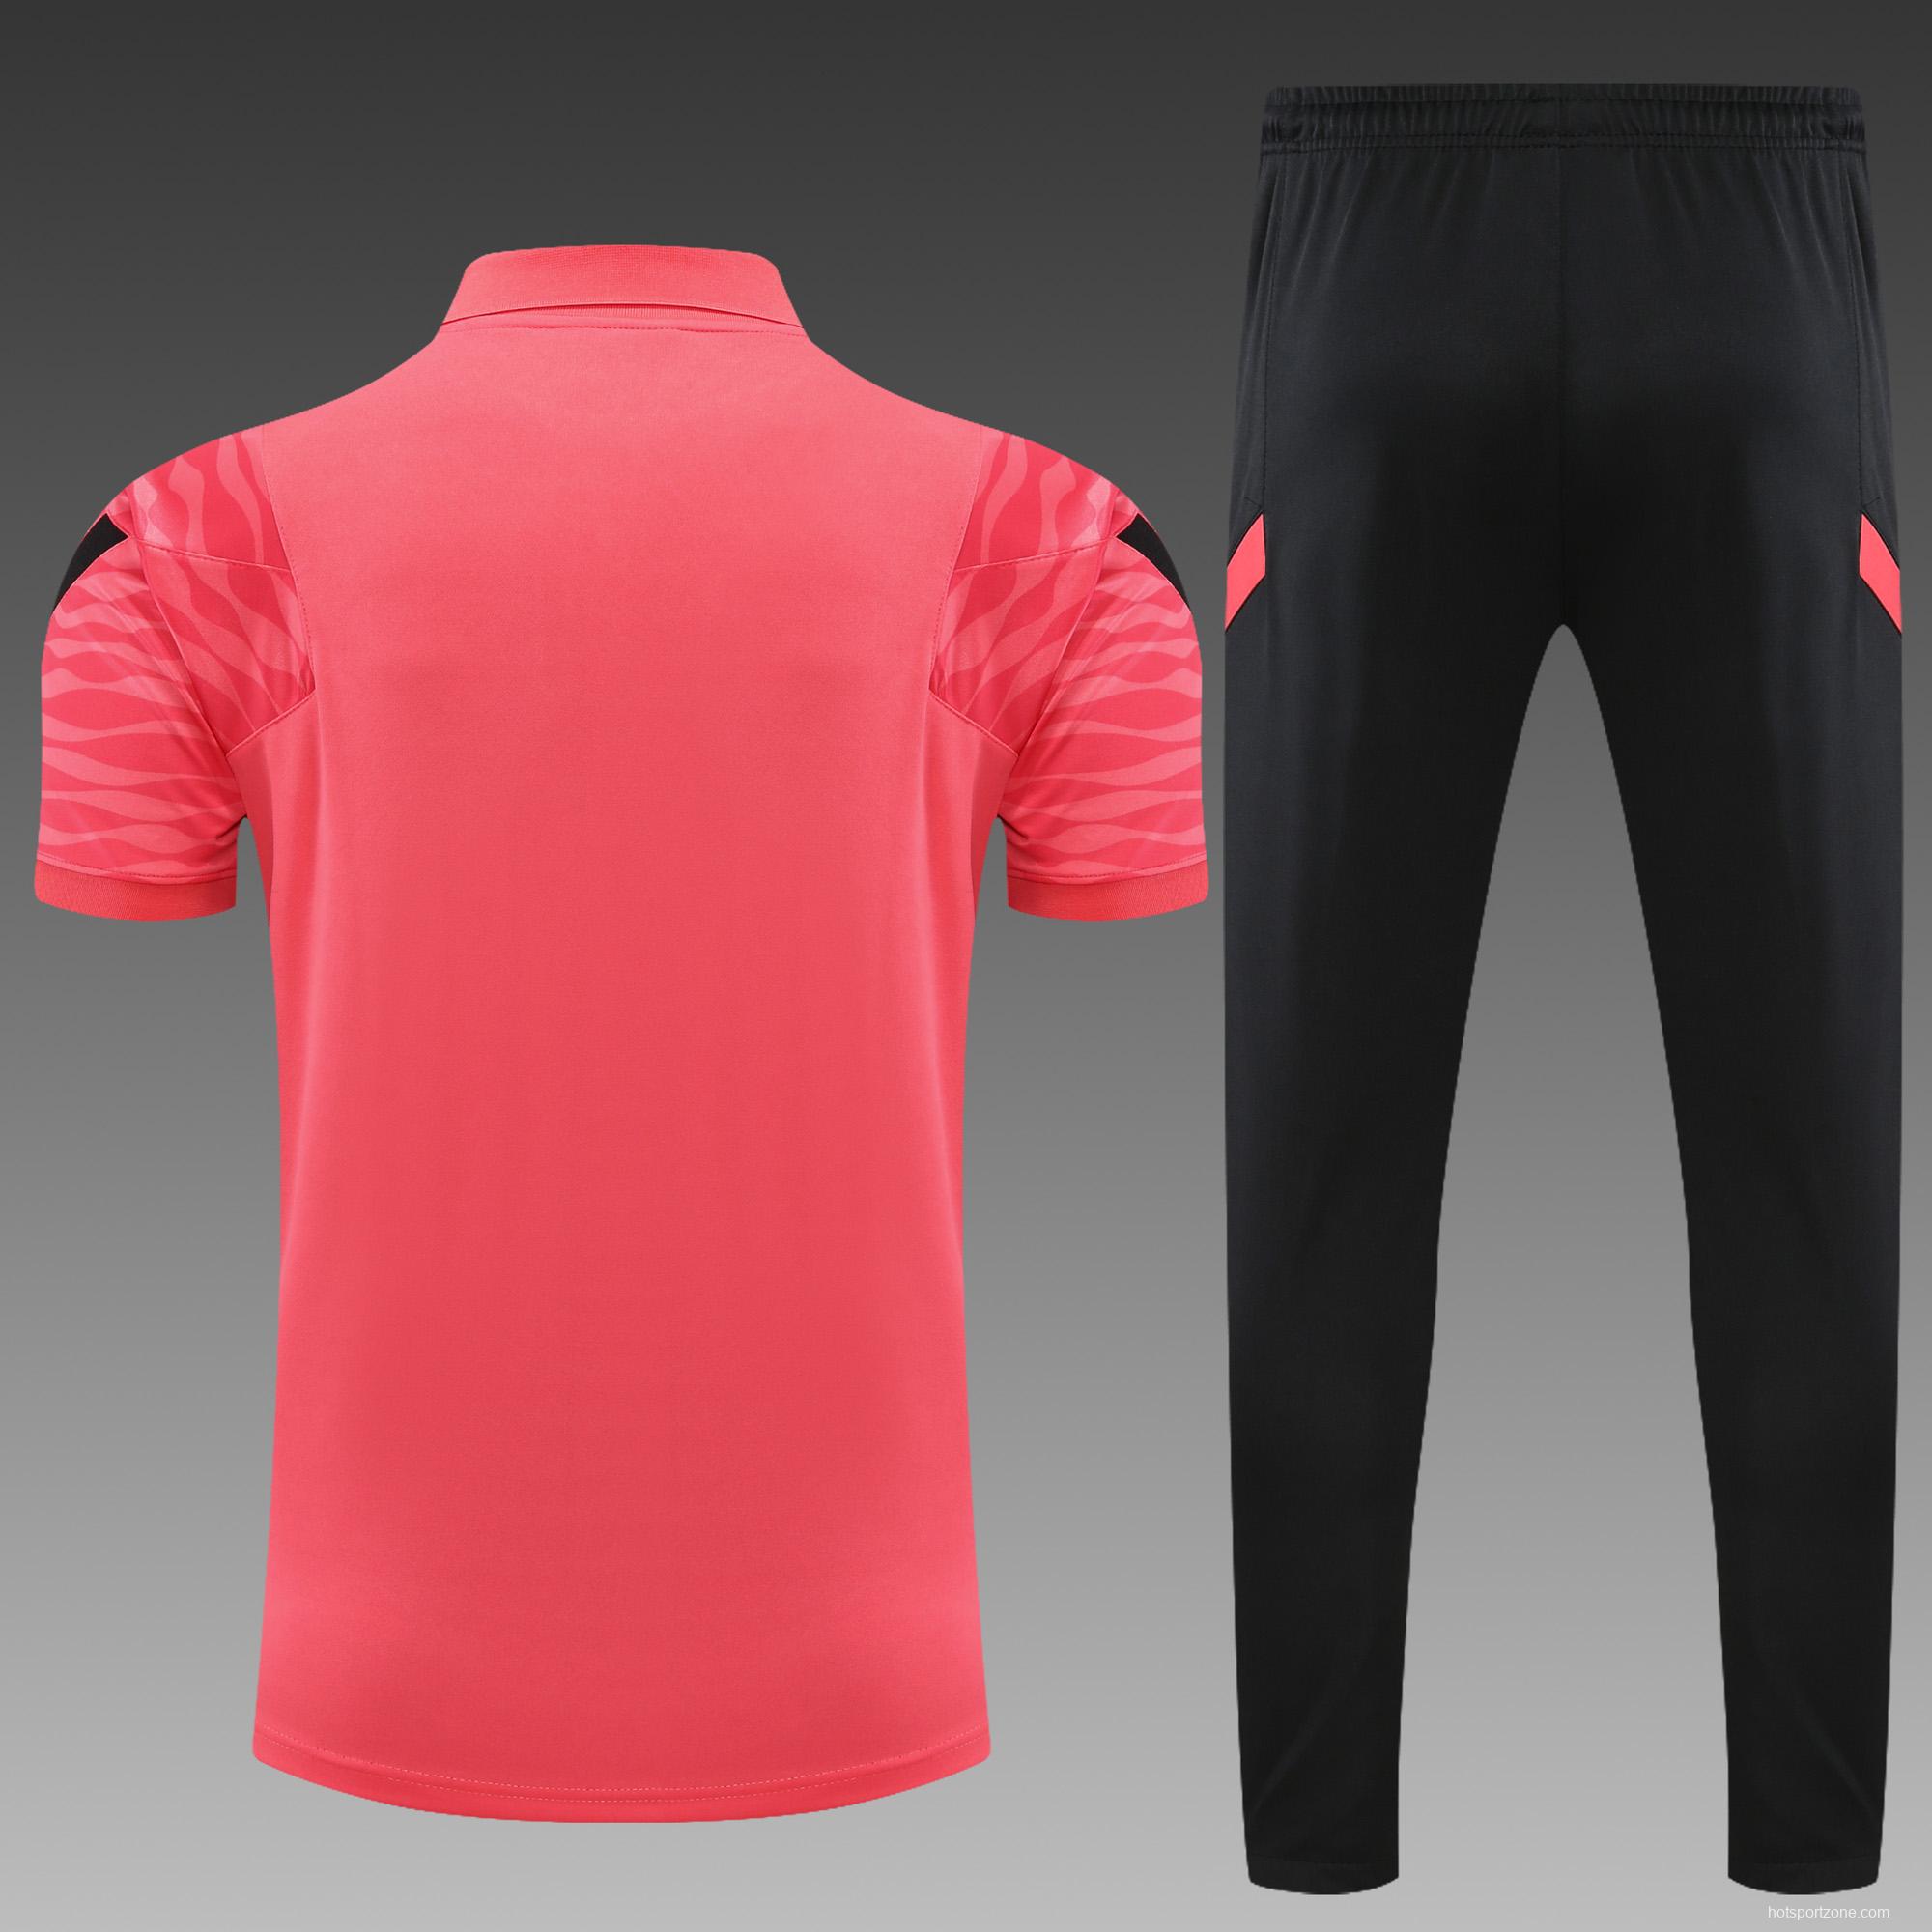 Atletico Madrid POLO kit Pink(not supported to be sold separately)